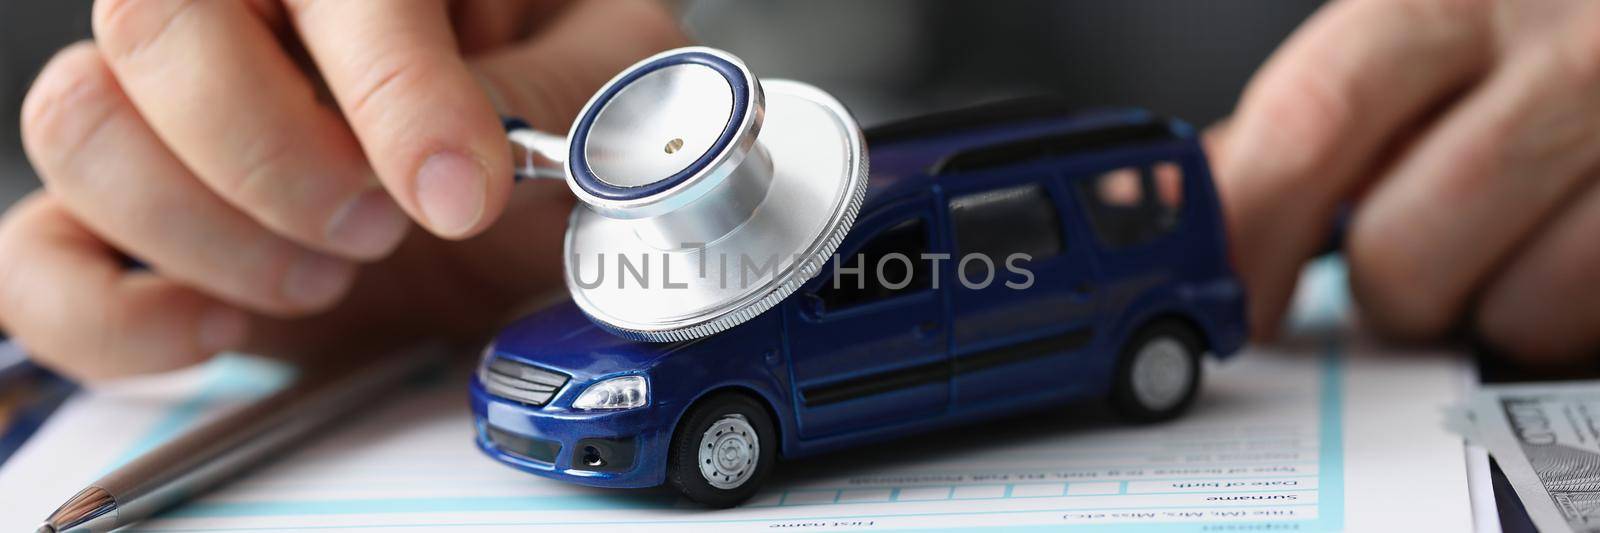 Close-up of man use car with stethoscope tool, symbol of car insurance or maintenance service. Protect automobile with insurance. Checkup, repair concept